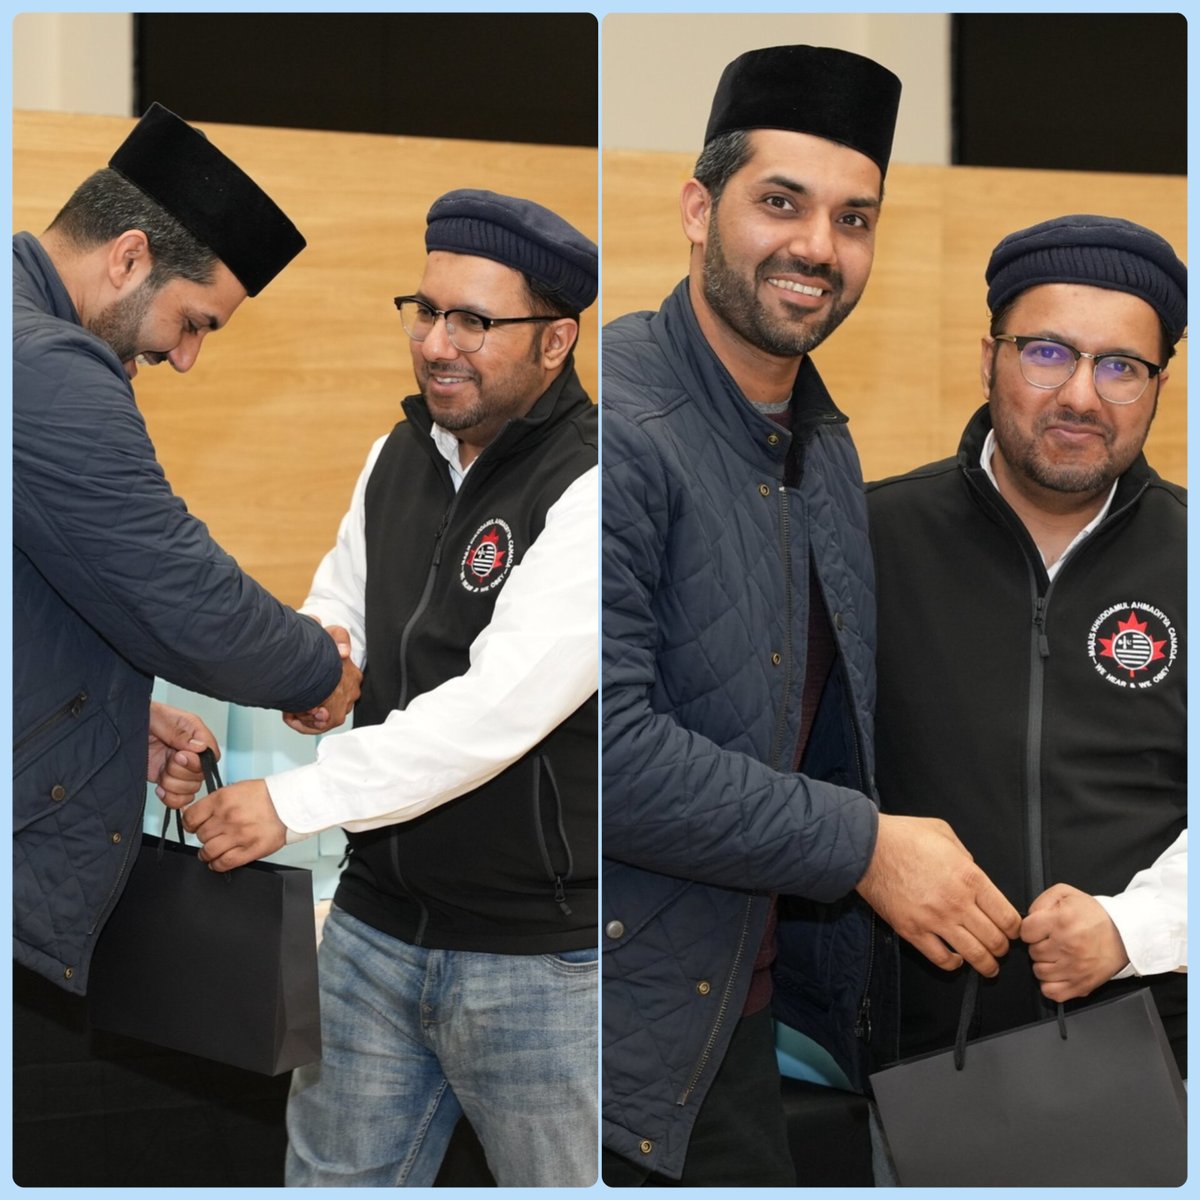 By the grace of Allah Almighty, I had the opportunity to be part of the historic National Majlis Amila @AMYACanada trip to the UK The trip included the opportunity for a Mulaqat with Hazrat #KhalifatulMasih I appreciate the hospitality of the @UKMuslimYouth team during our stay